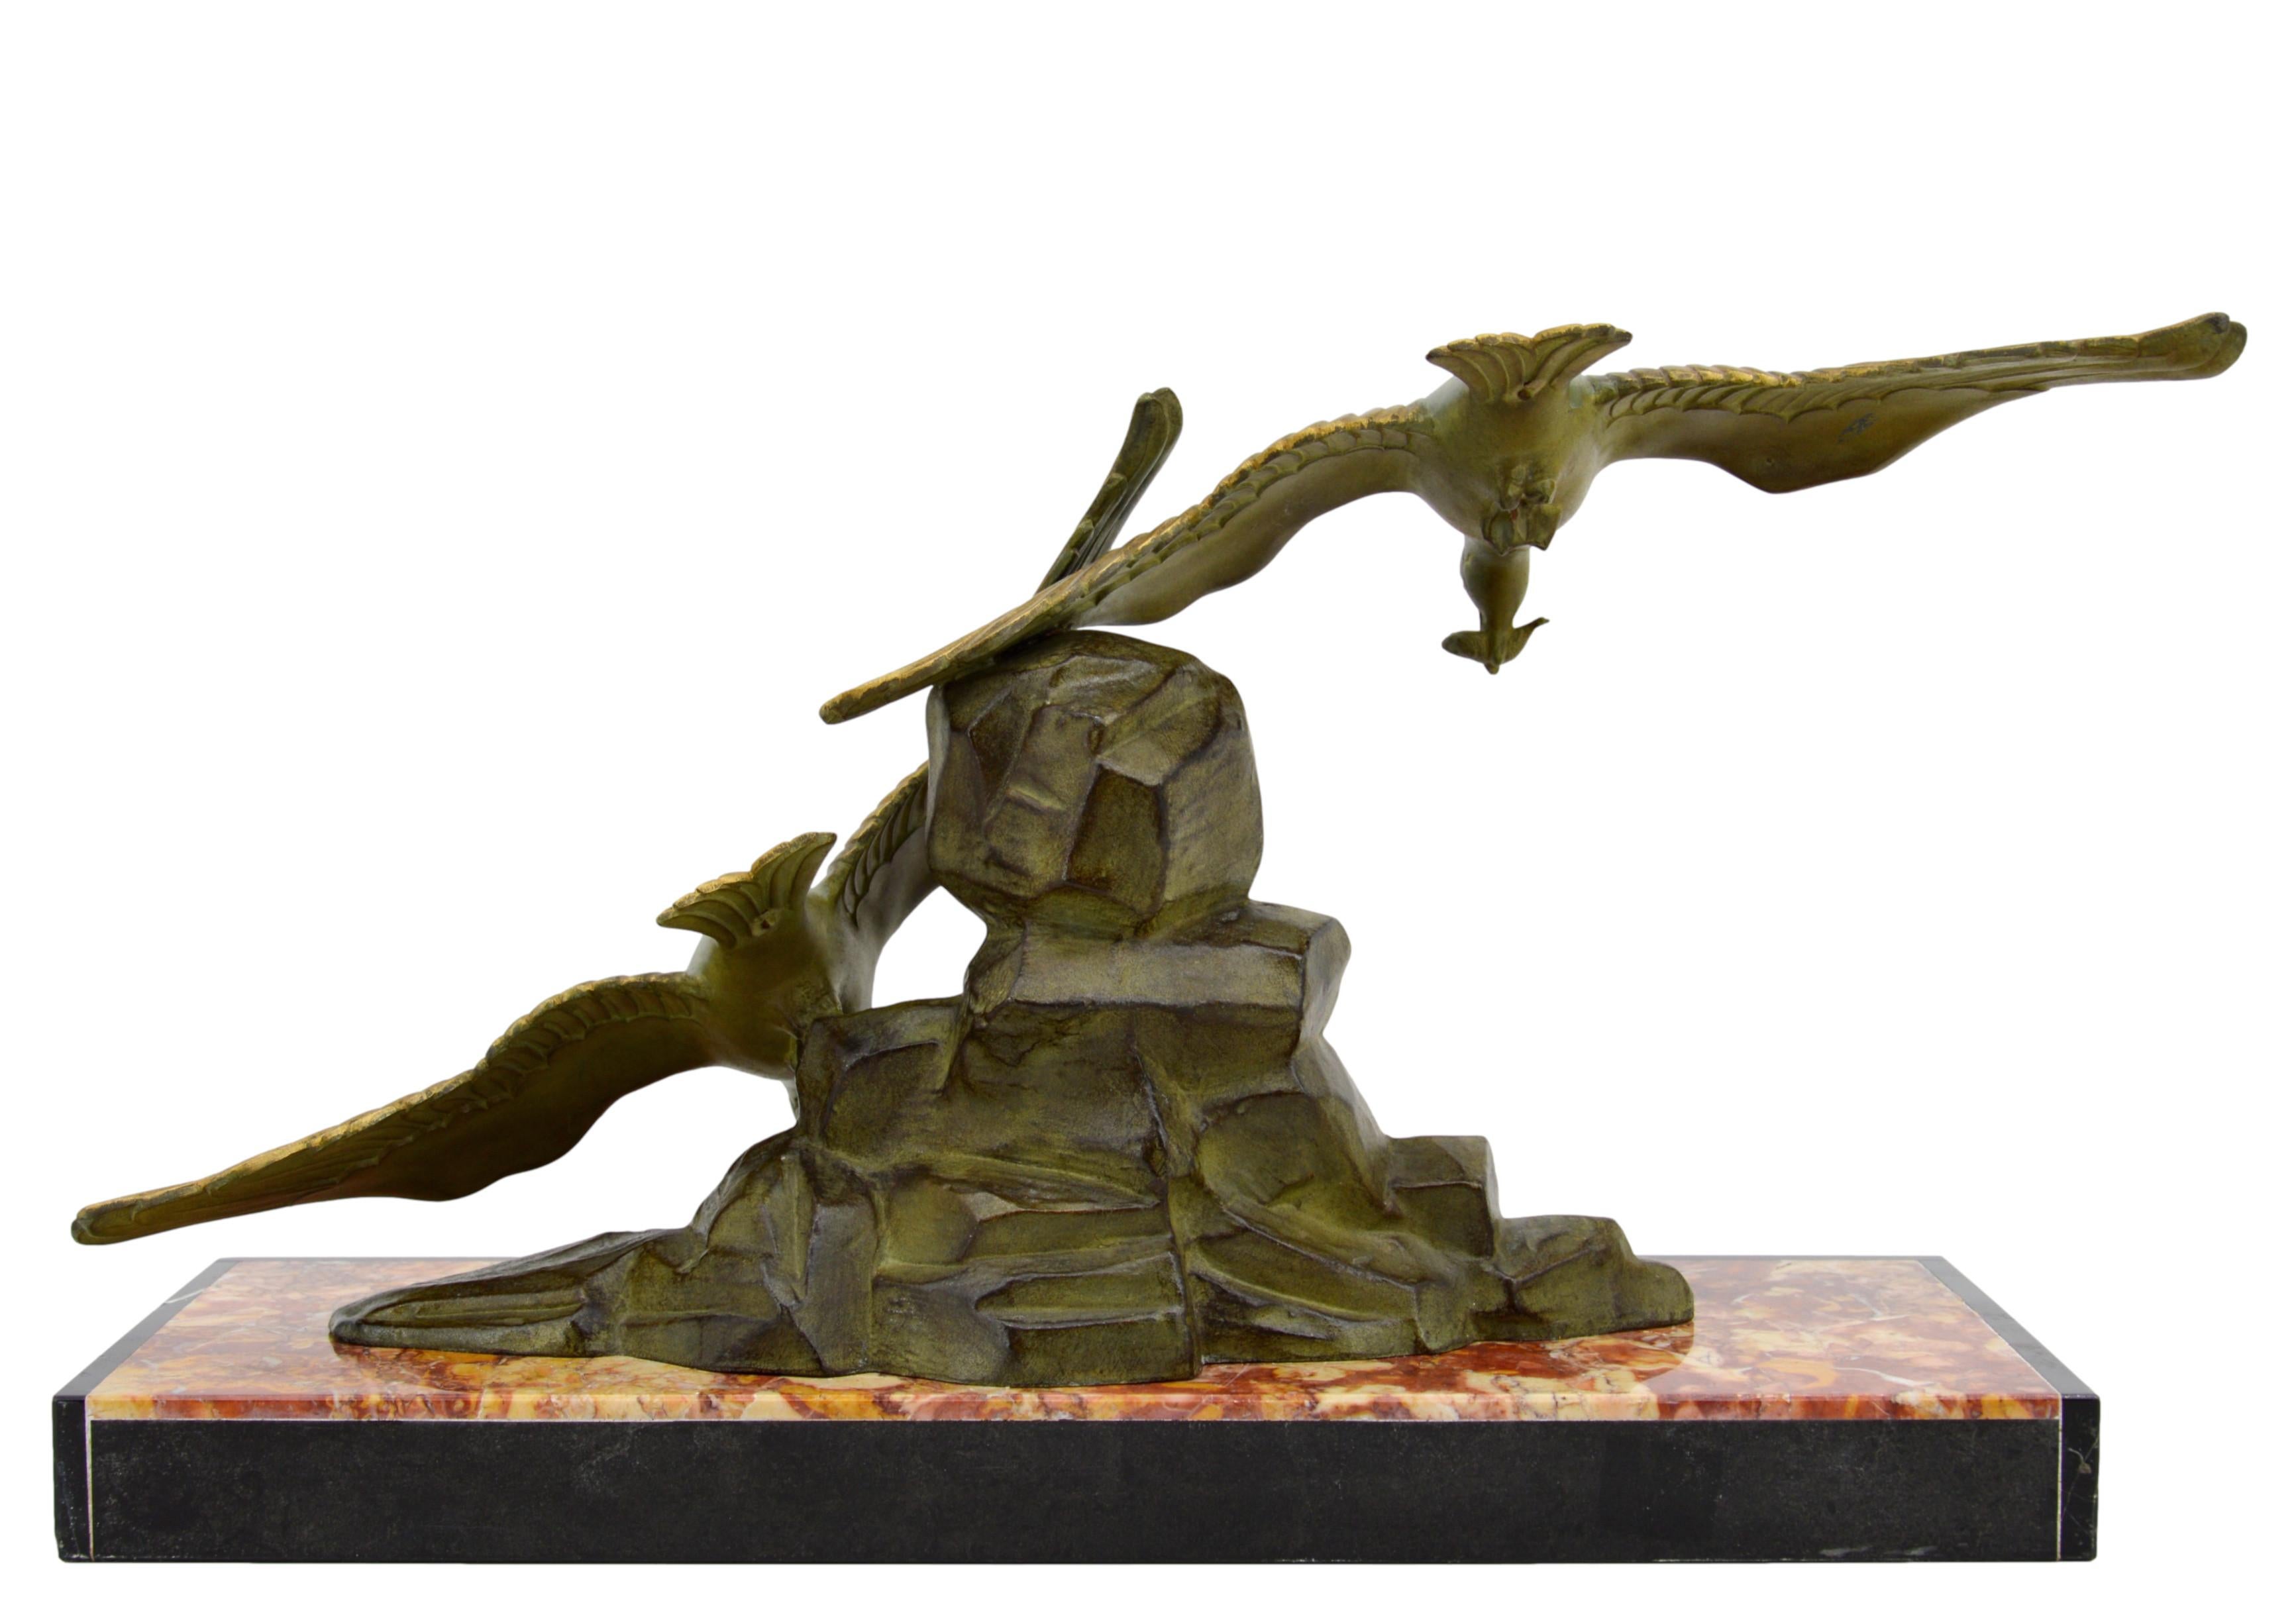 French Art Deco seagull couple sculpture, France, 1930s. Spelter, marble & onyx. Measures: Height: 11